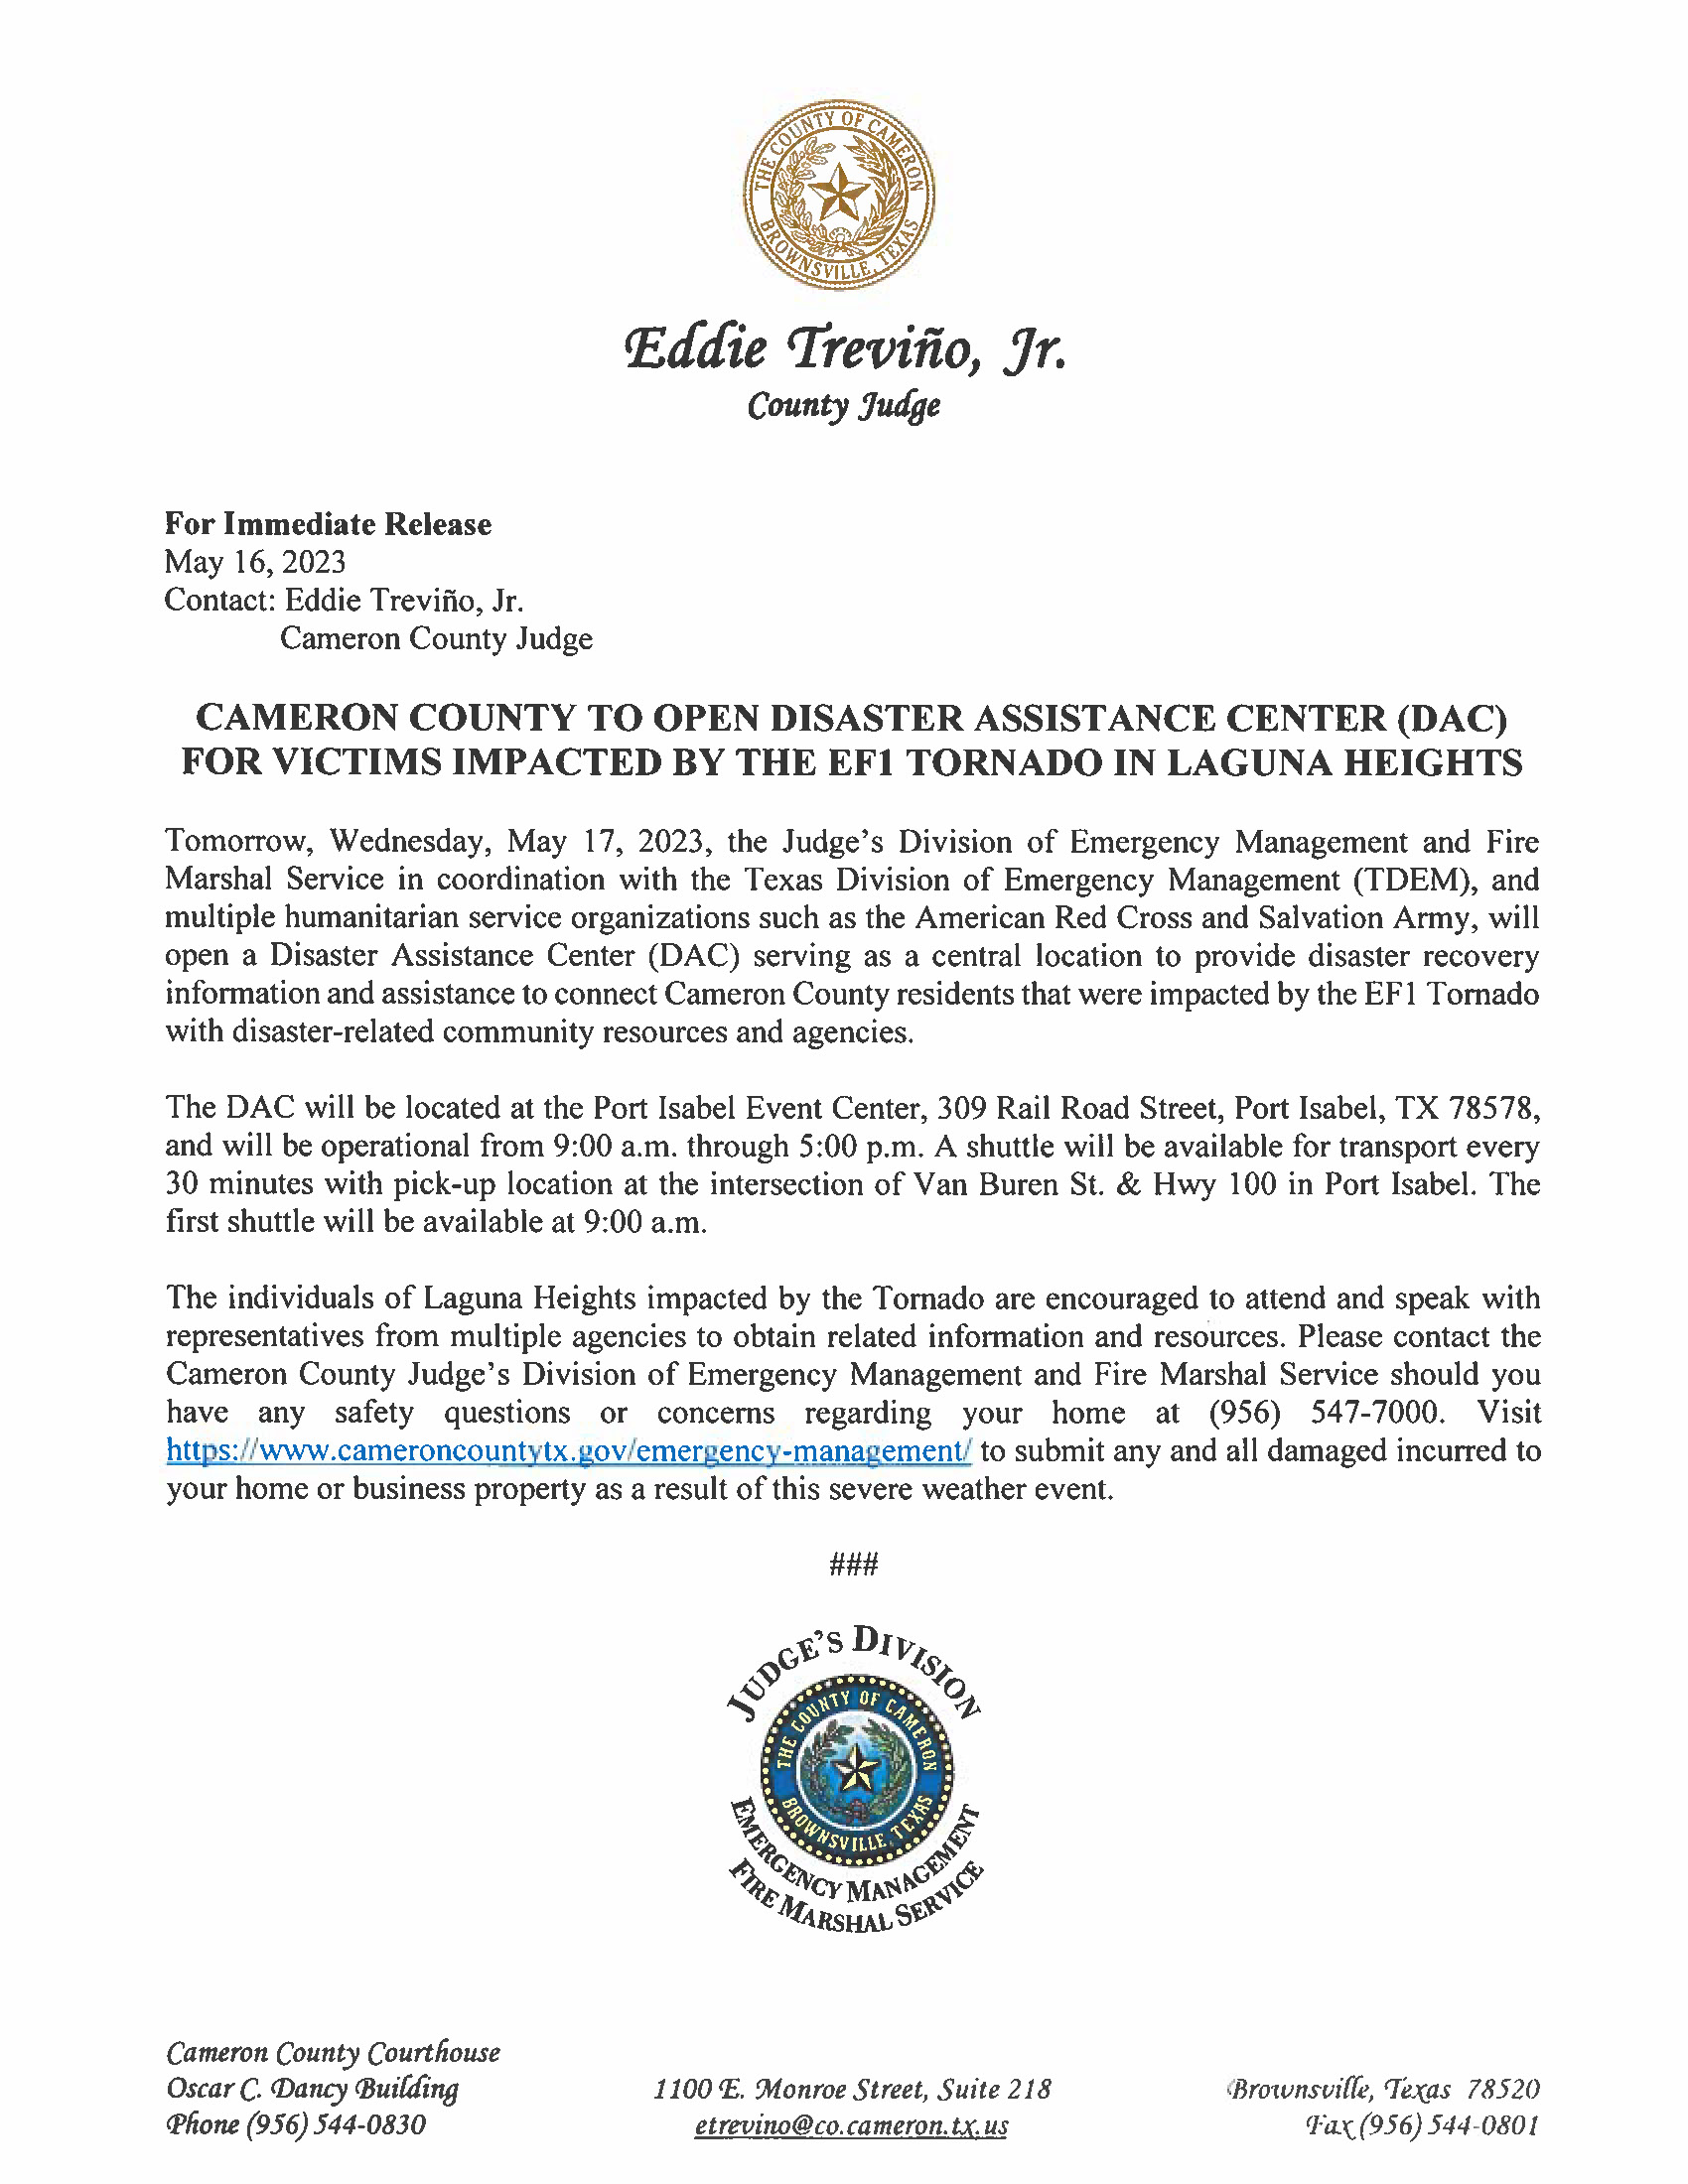 Cameron County To Open A Disaster Assistance Center DAC For Victims Impacted By The EF1 Tornado In Laguna Heights